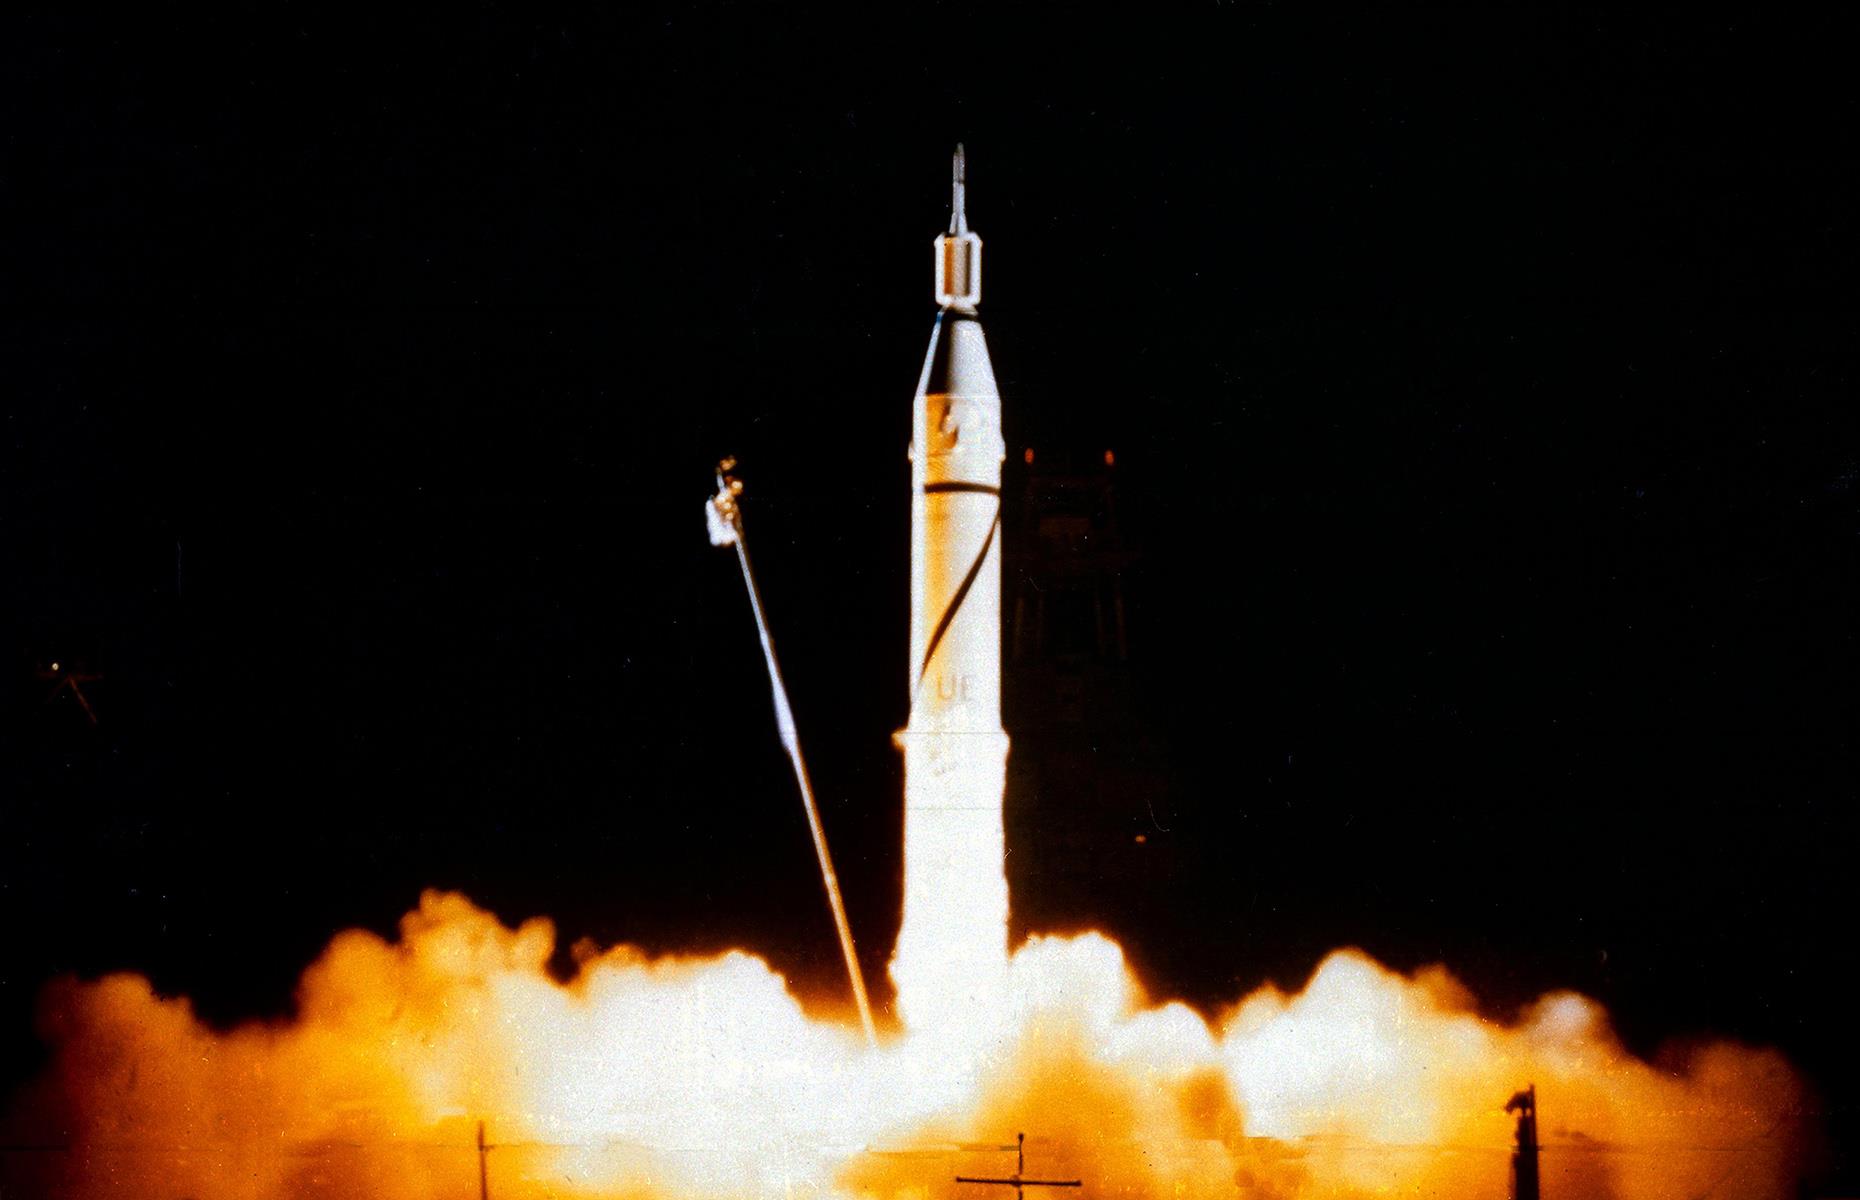 <p>Hot on the heels of the Soviets, the USA launched its debut satellite on January 31, 1958. Explorer 1 was the first spacecraft to detect the Van Allen radiation belt. It remained in orbit until 1970, vaporizing on reentry over the Pacific Ocean.</p>  <p>This image shows a NASA Jupiter C rocket launching the Explorer 1 satellite into orbit at the Cape Canaveral Air Force Station Launch Complex.</p>